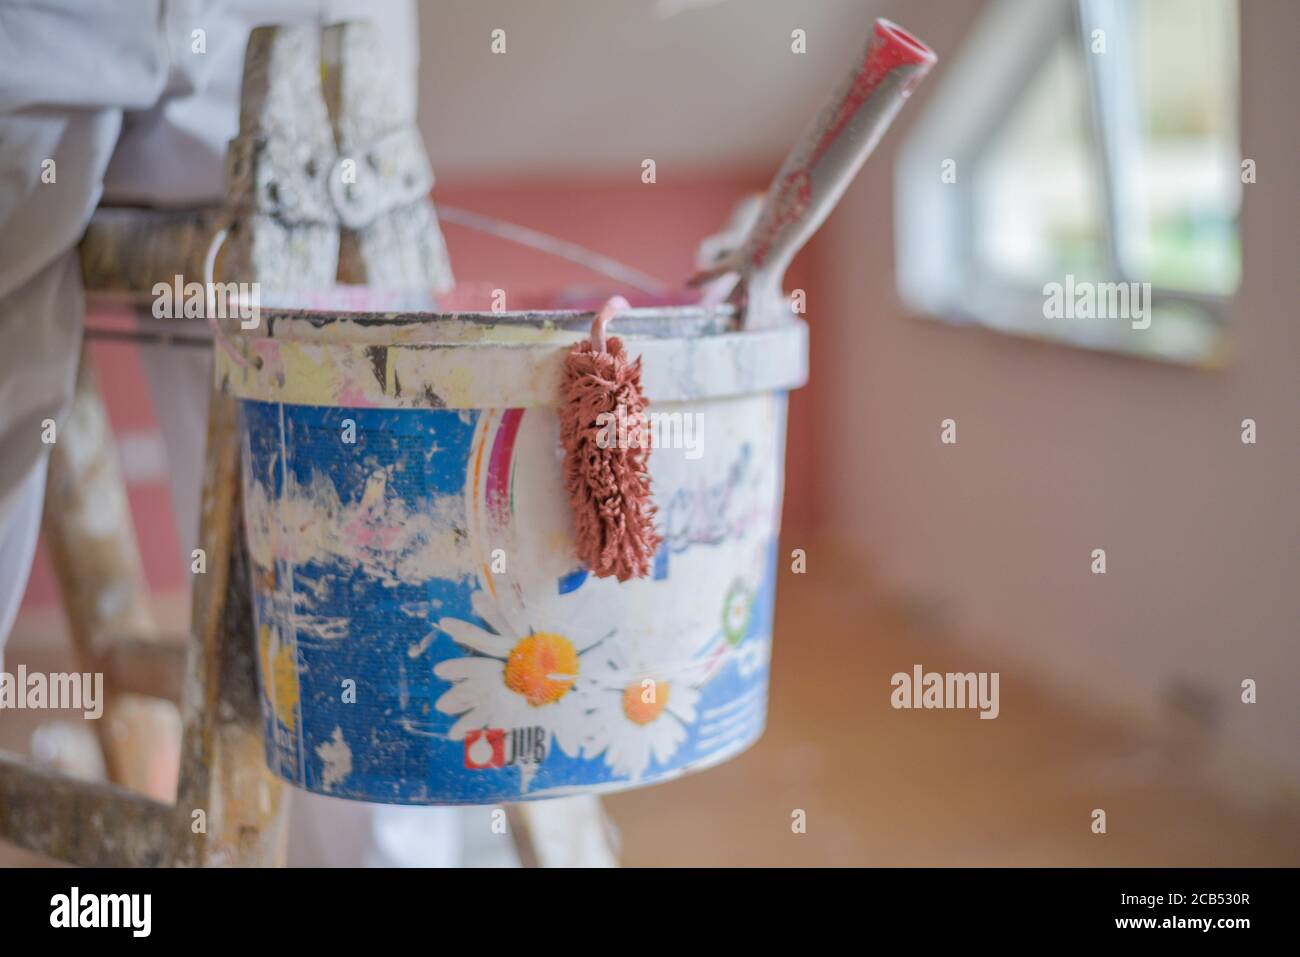 Closeup shot of a paint bucket hanging on a ladder Stock Photo